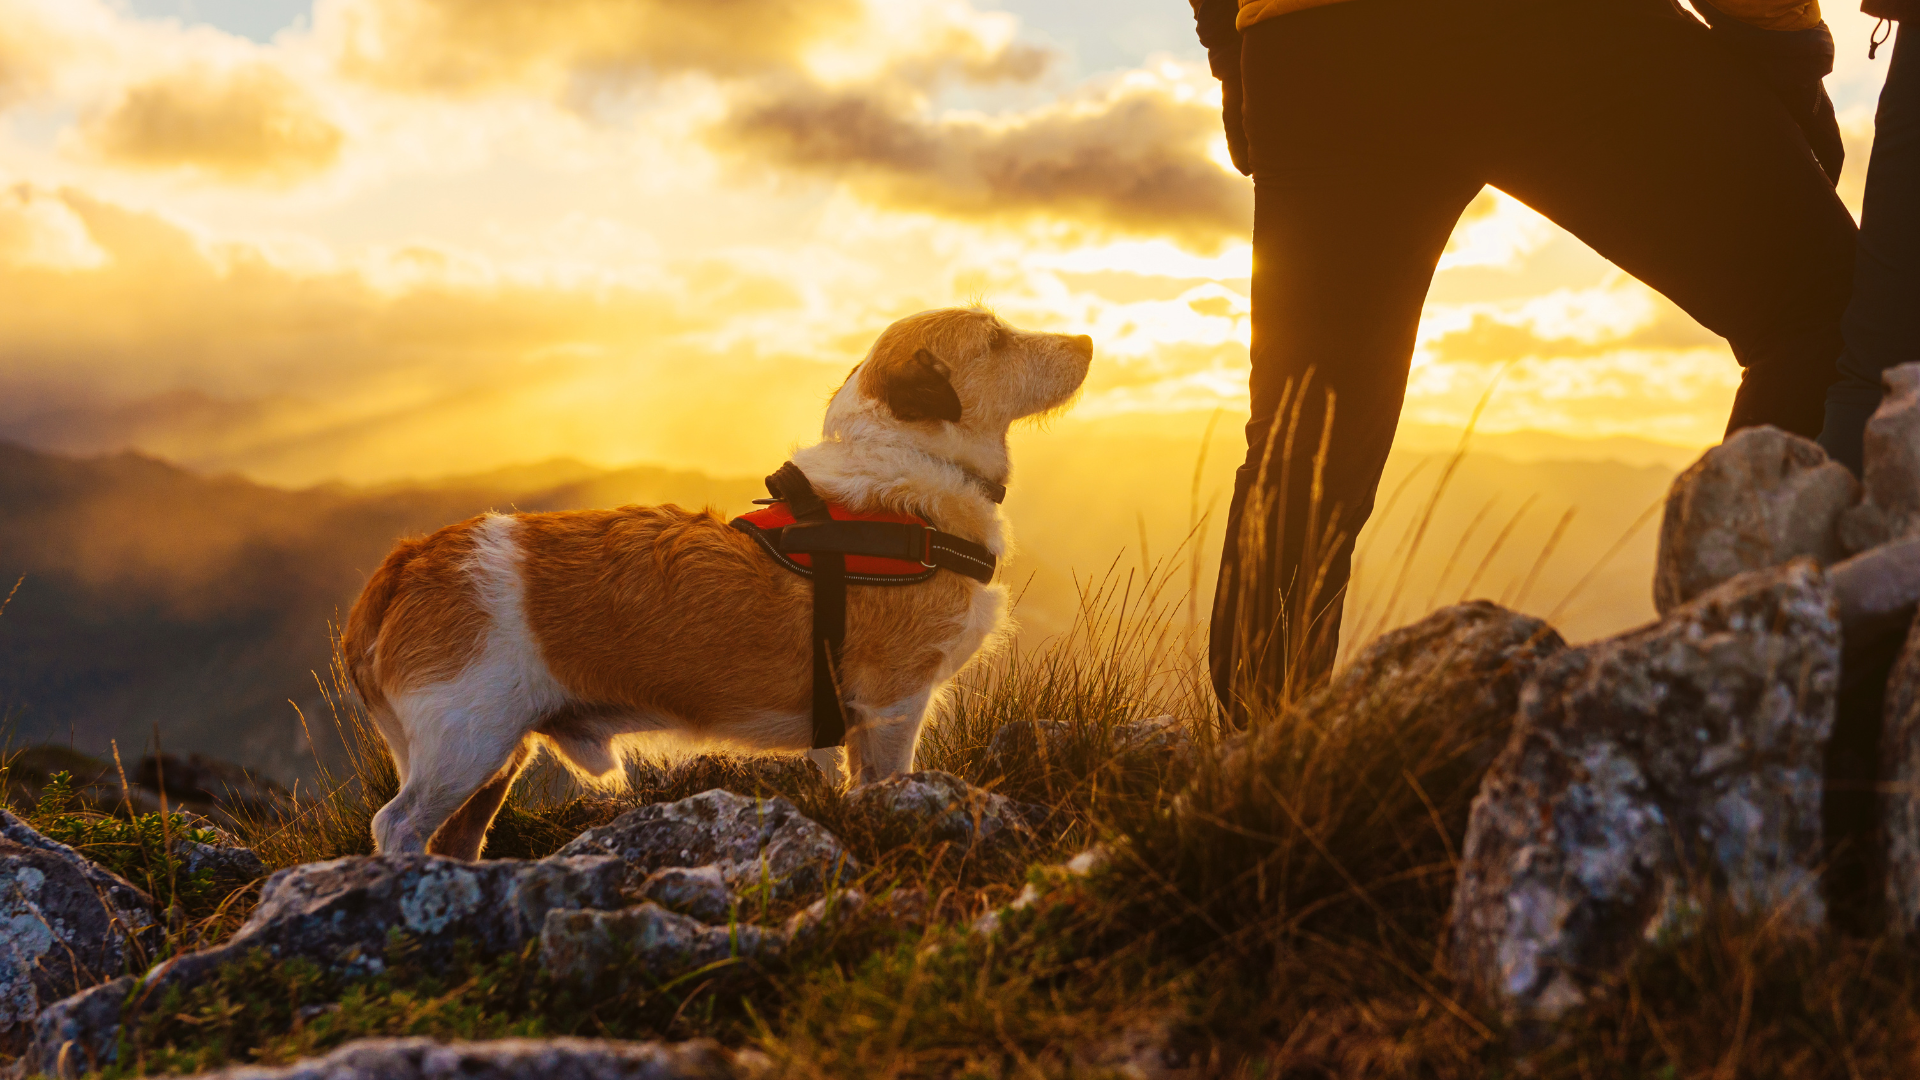 Long-Distance Hiking Trails Suitable for Dogs